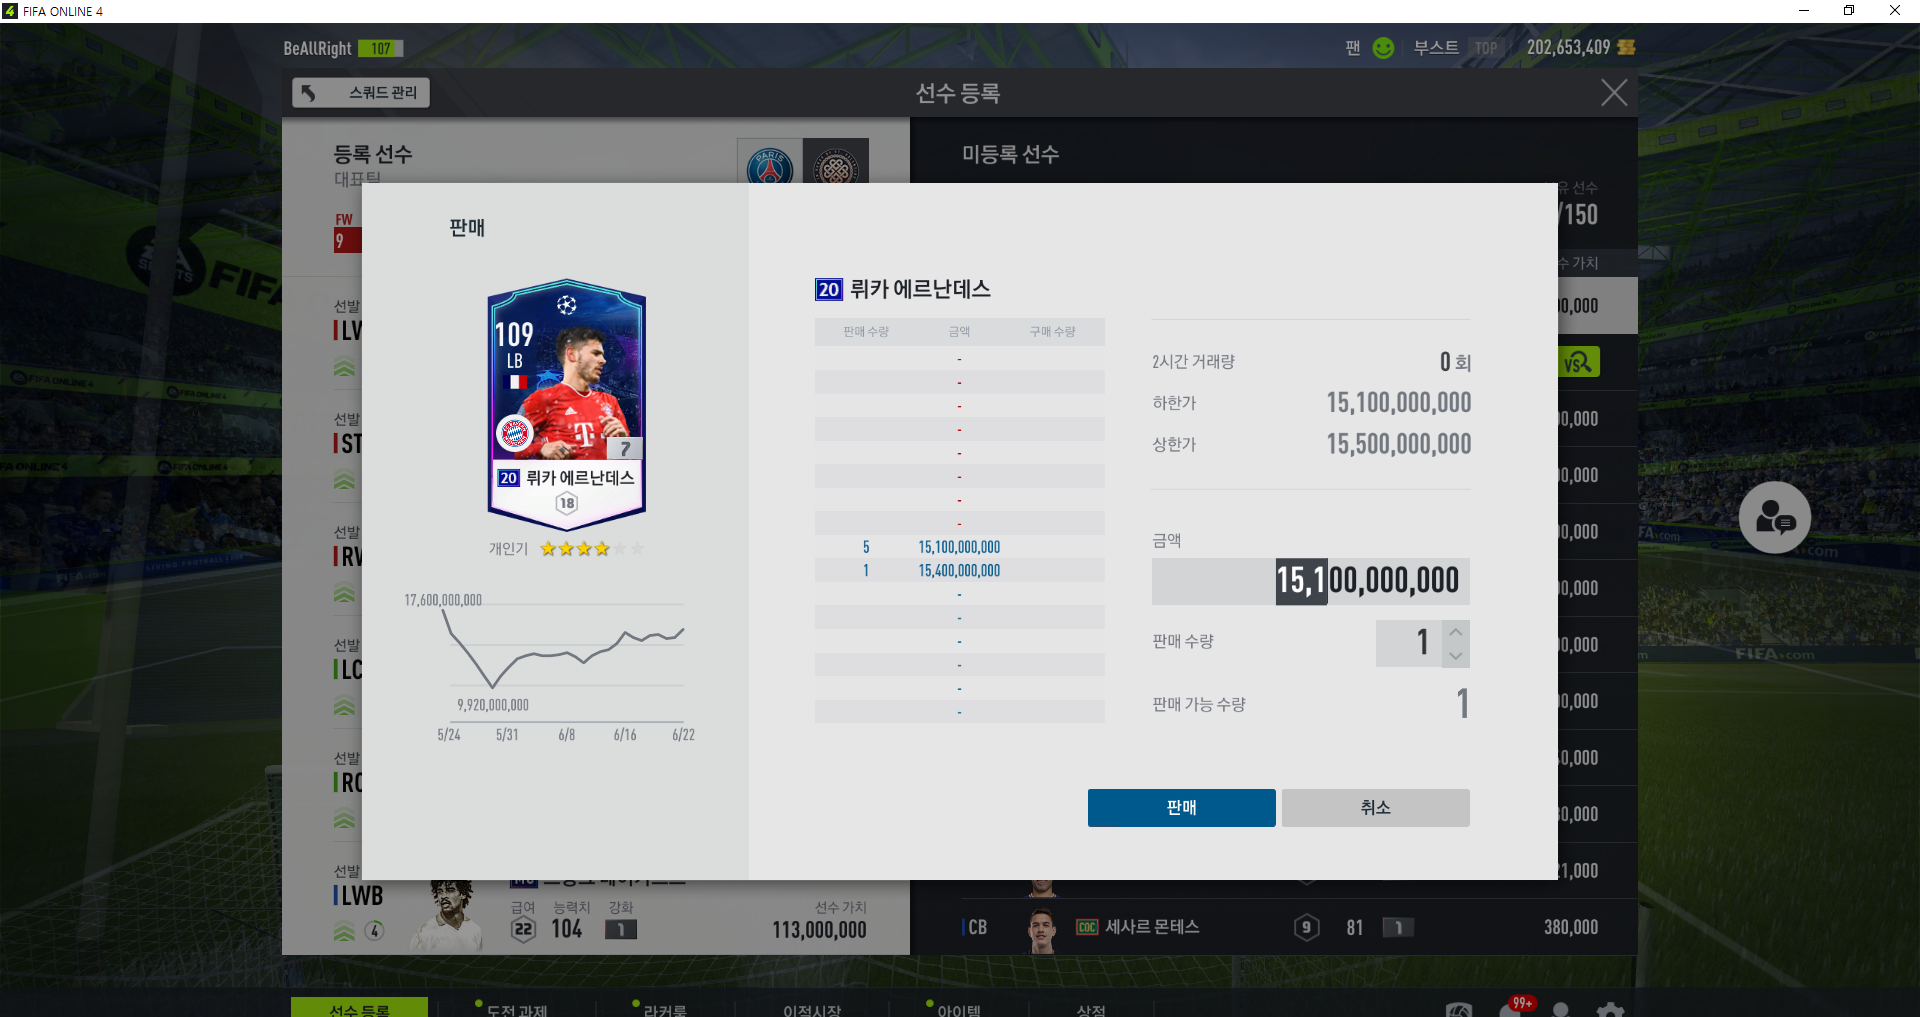 FIFA ONLINE 4 2022-06-23 오후 5_13_36.png